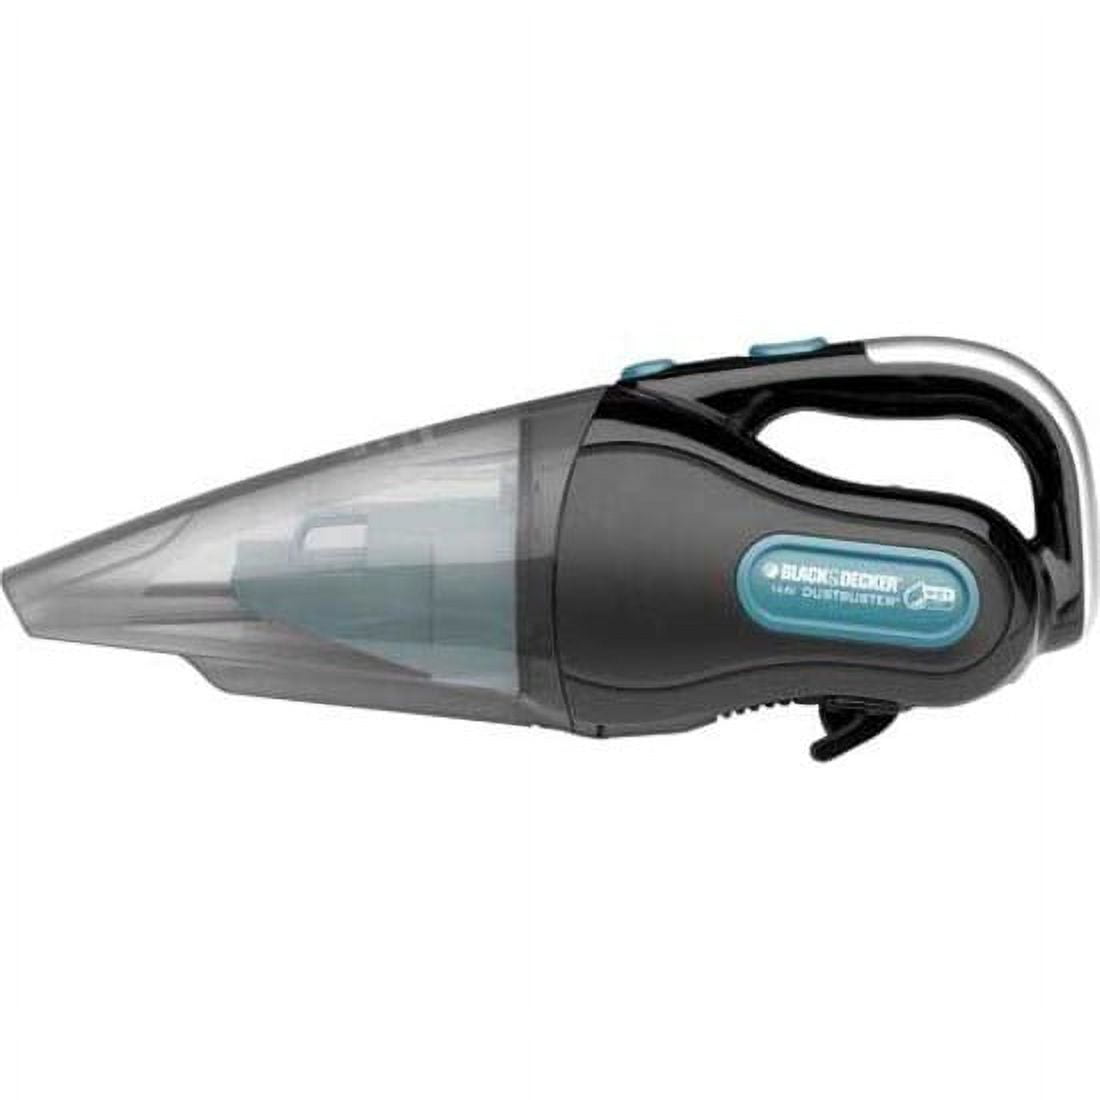 Black and Decker 9330 - Dustbuster Type 4 